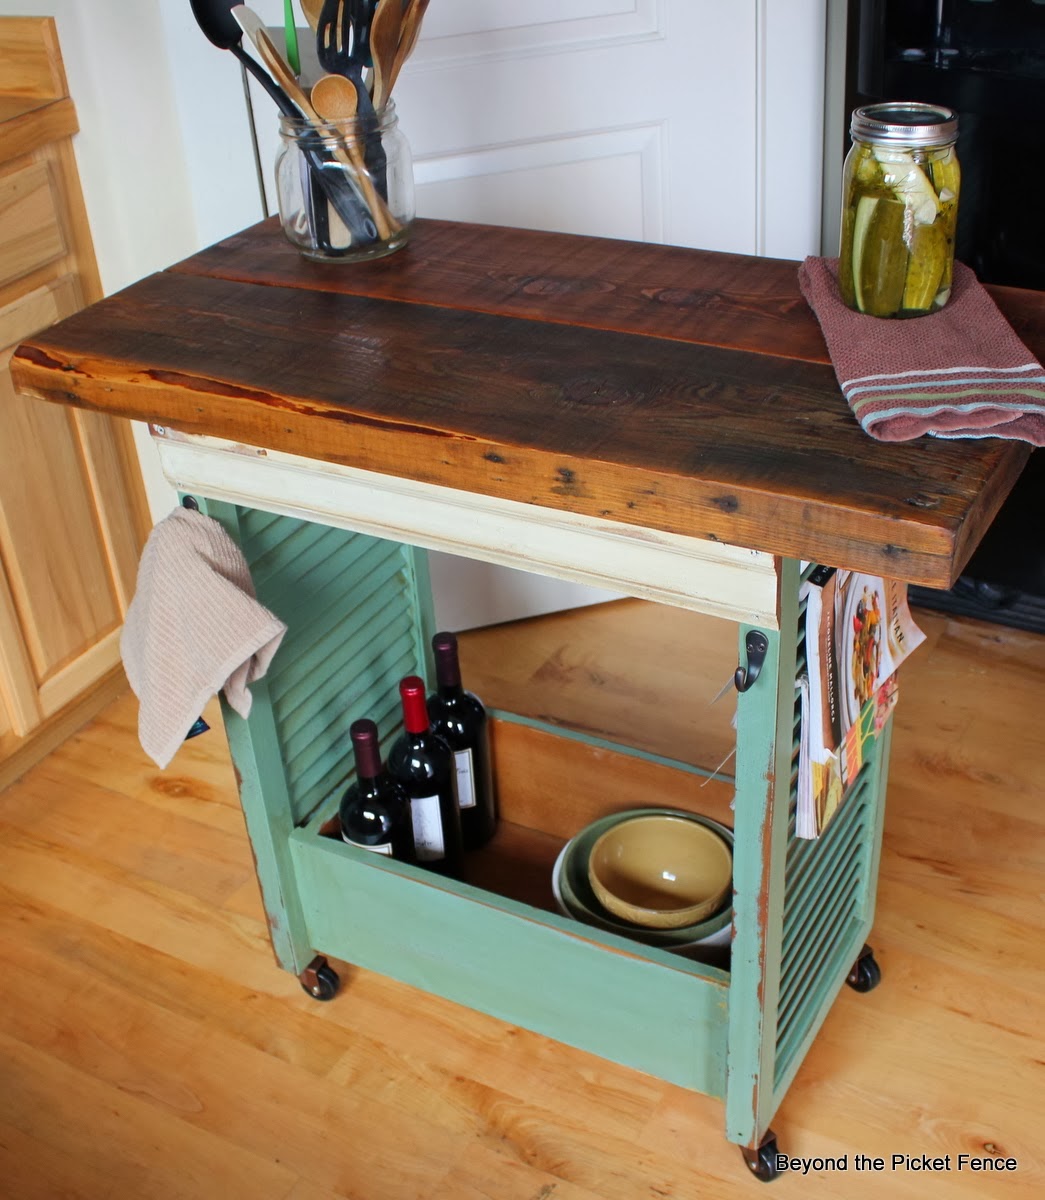 repurposed drawer ideas http://bec4-beyondthepicketfence.blogspot.com/2014/03/projects-galore-with-drawers.html